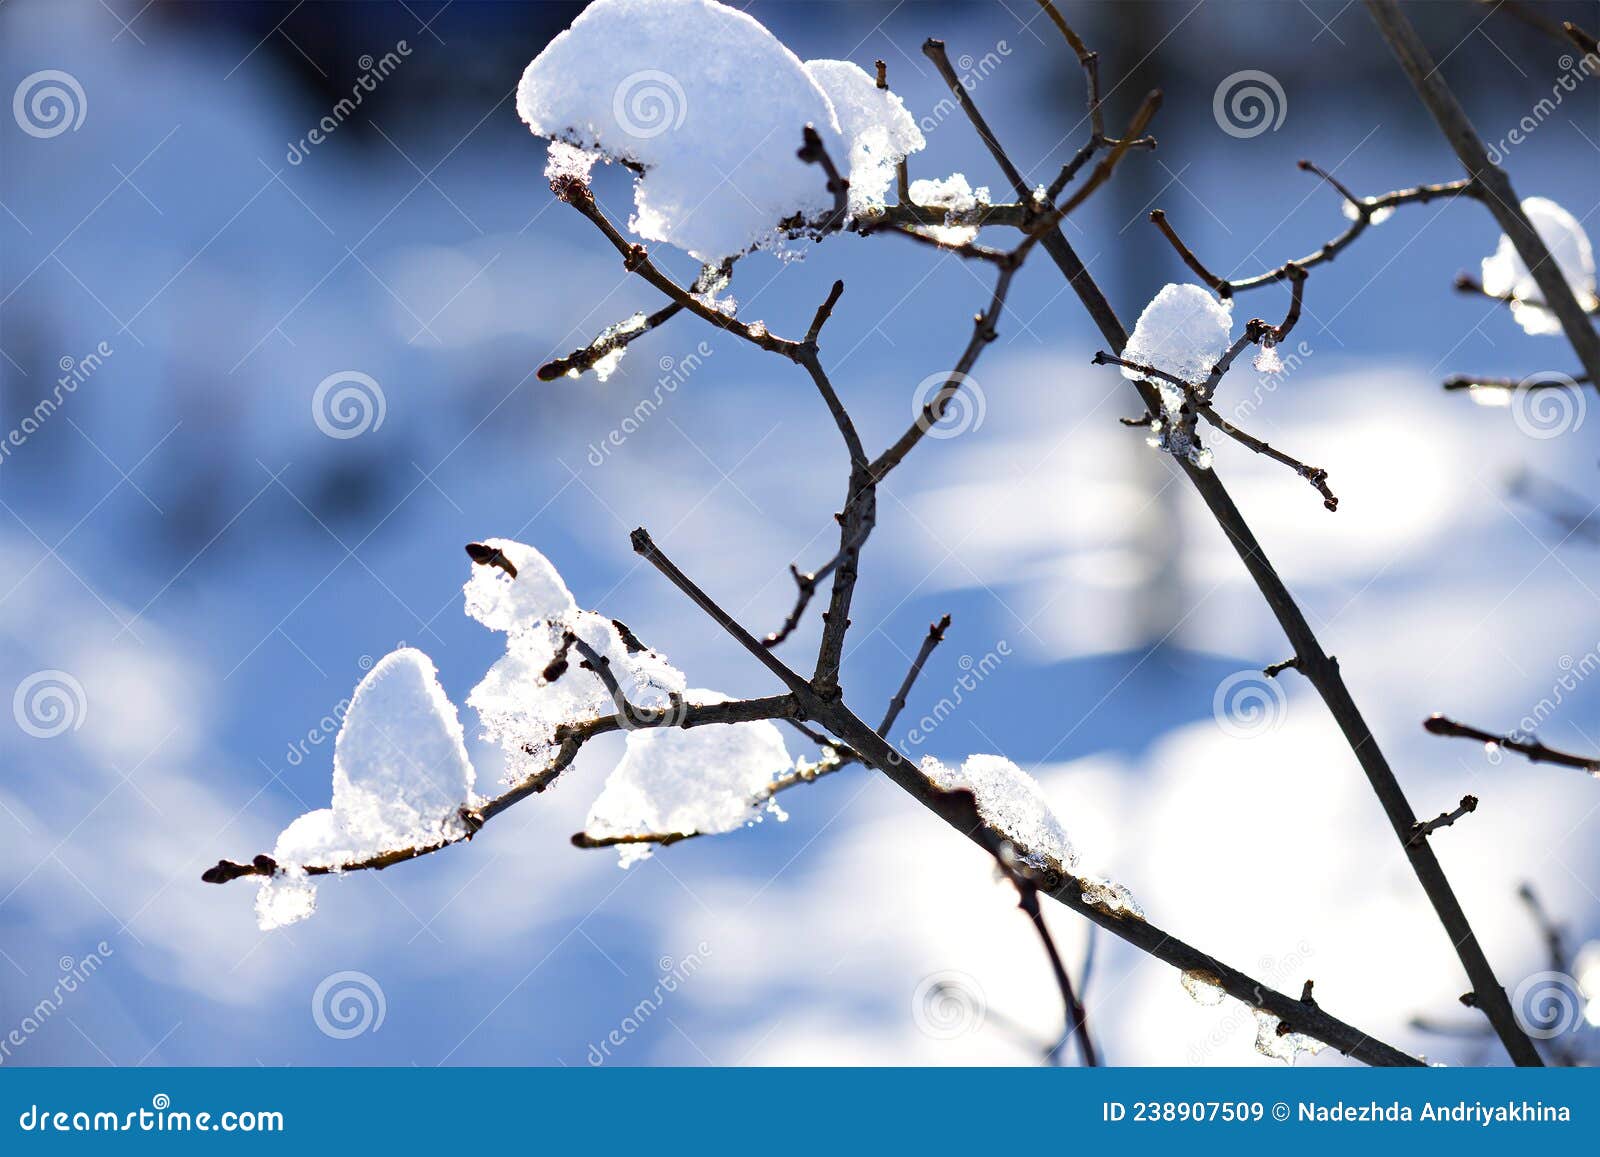 Tree Branches with Snowballs in Sunny Sequins Stock Image - Image of ...